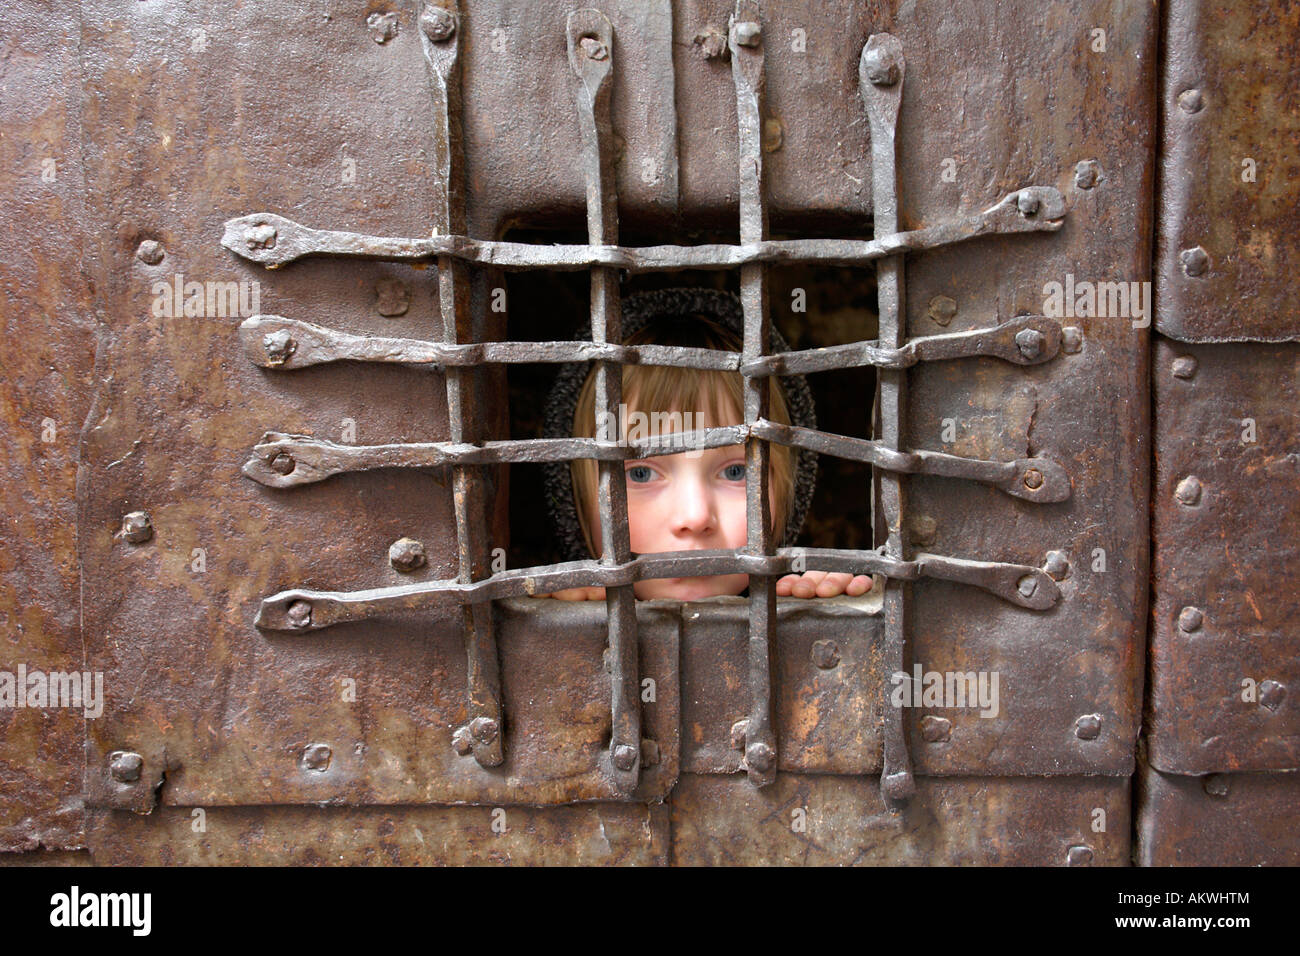 Italy, South Tyrol, Potrait of a girl behind bars Stock Photo